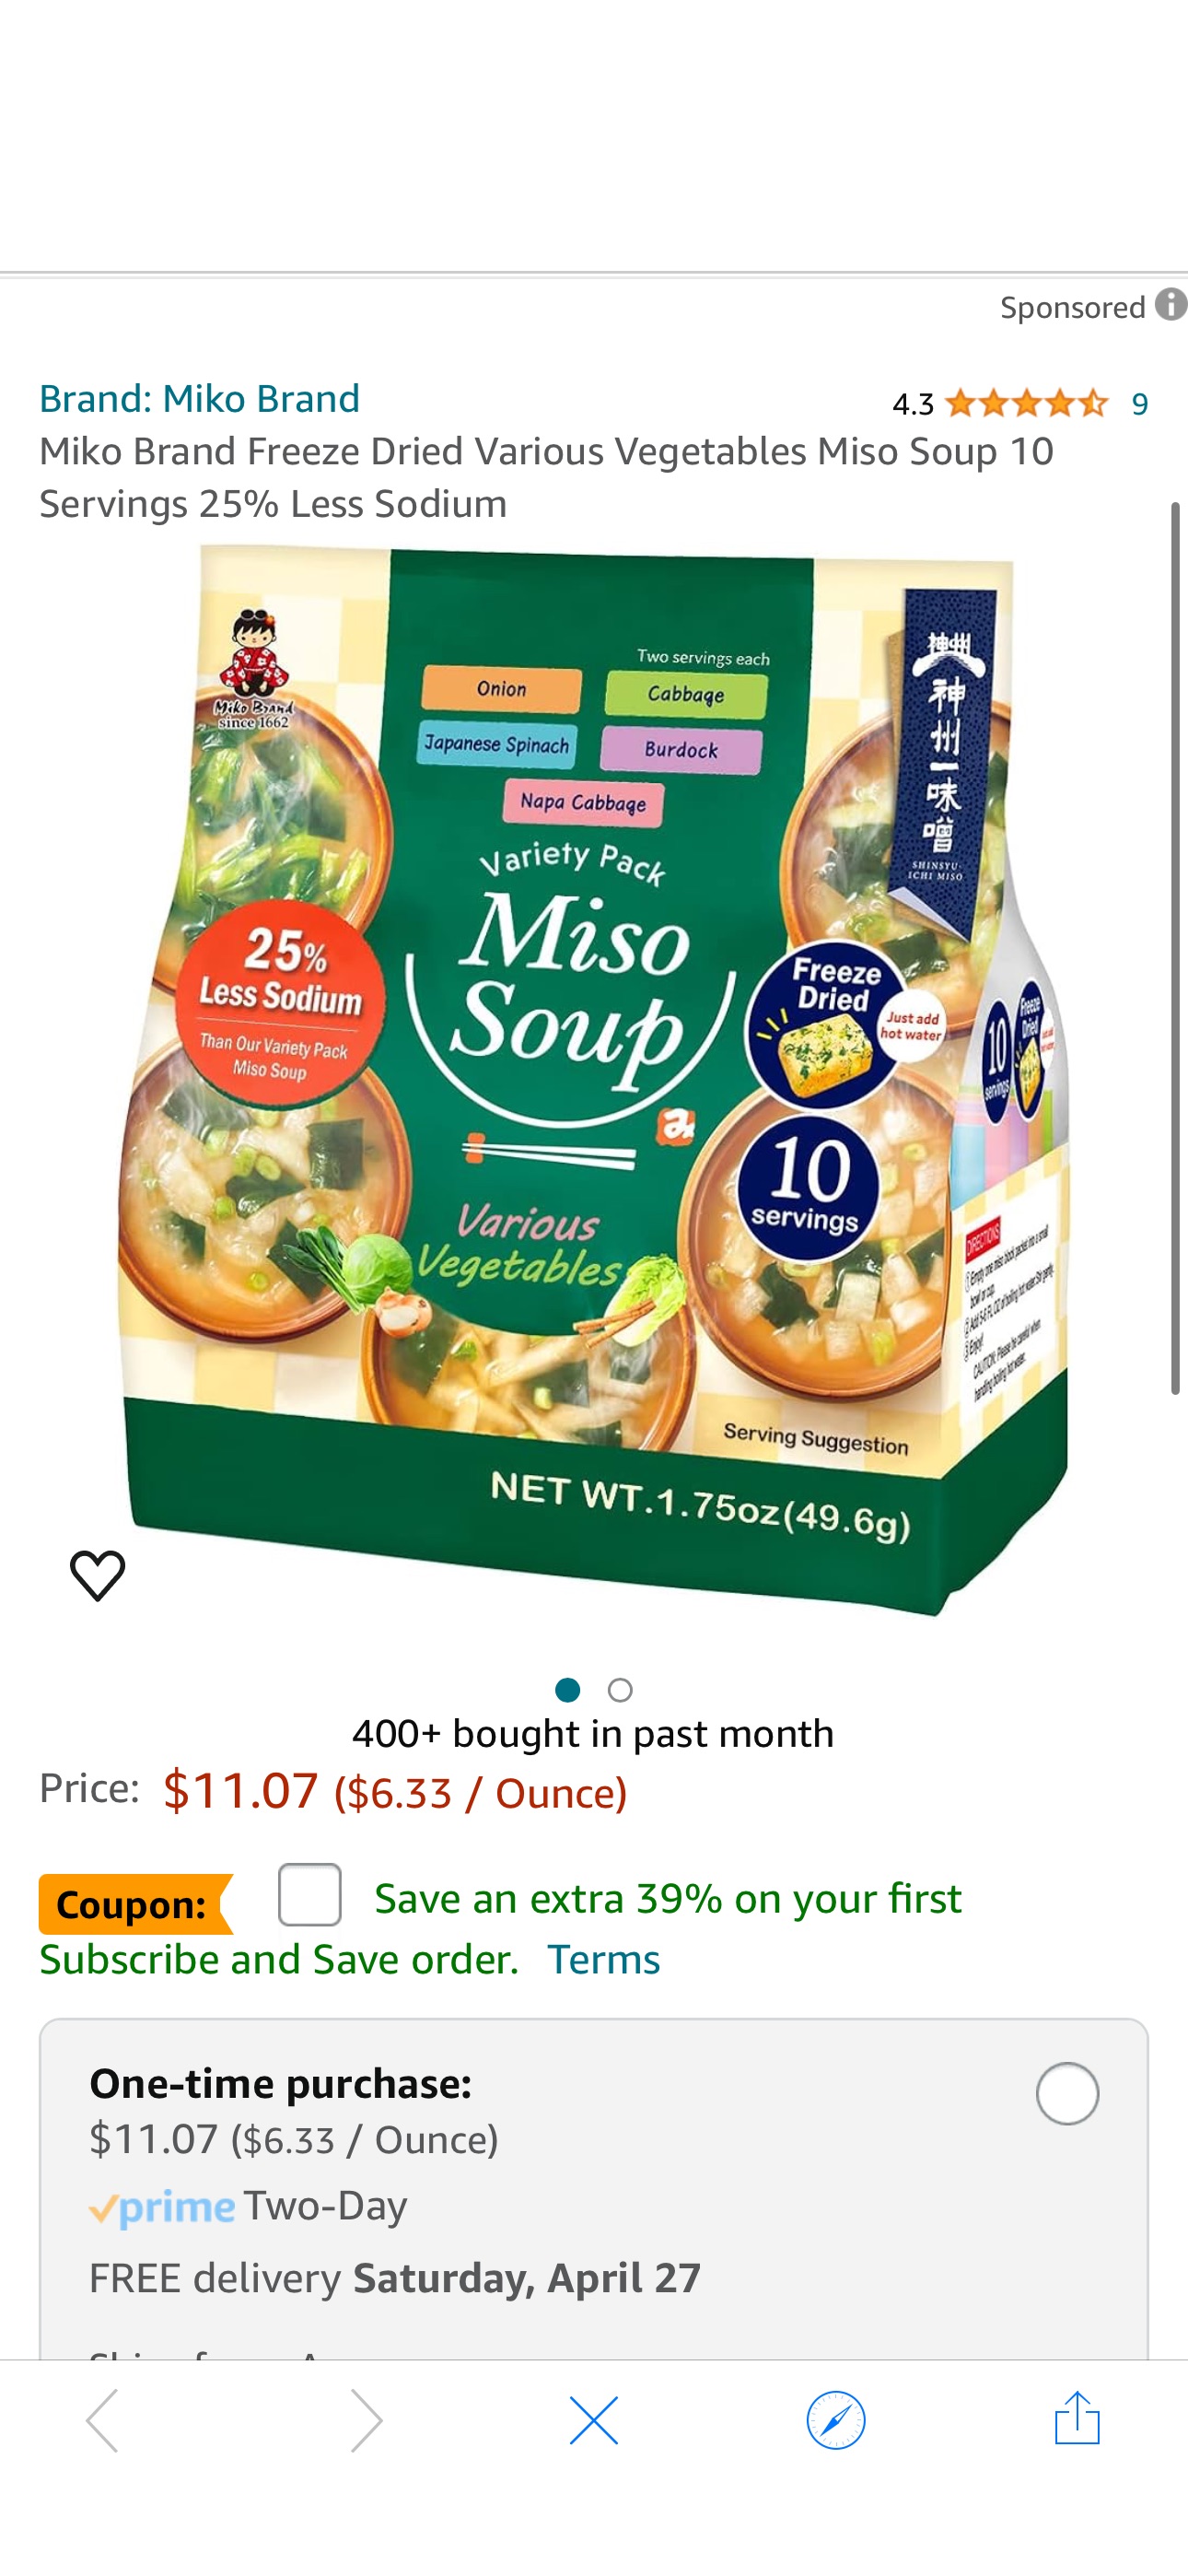 Amazon.com : Miko Brand Freeze Dried Various Vegetables Miso Soup 10 Servings 25% Less Sodium : Grocery & Gourmet Food coupon